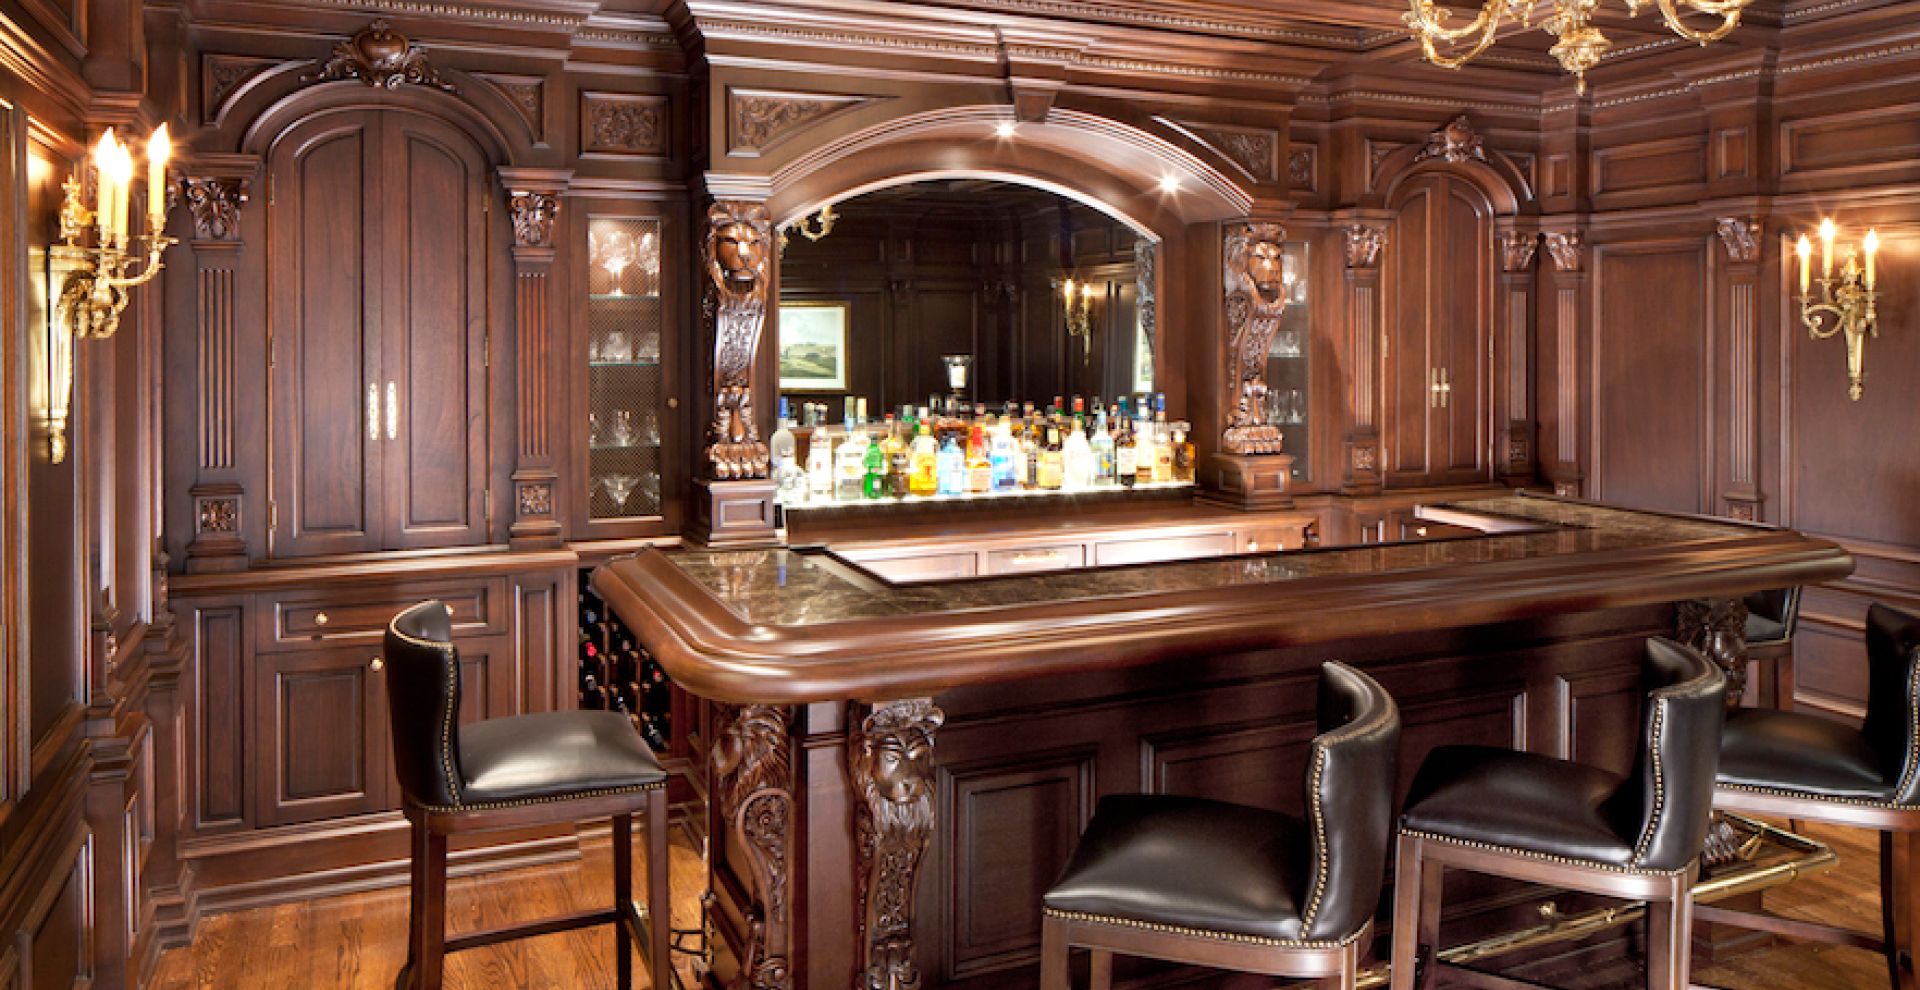 Bespoke Residential Royal Bar Furniture Setup in Classic Wood Carving Design- Carved in India - Brand Royalzig Luxury Furniture